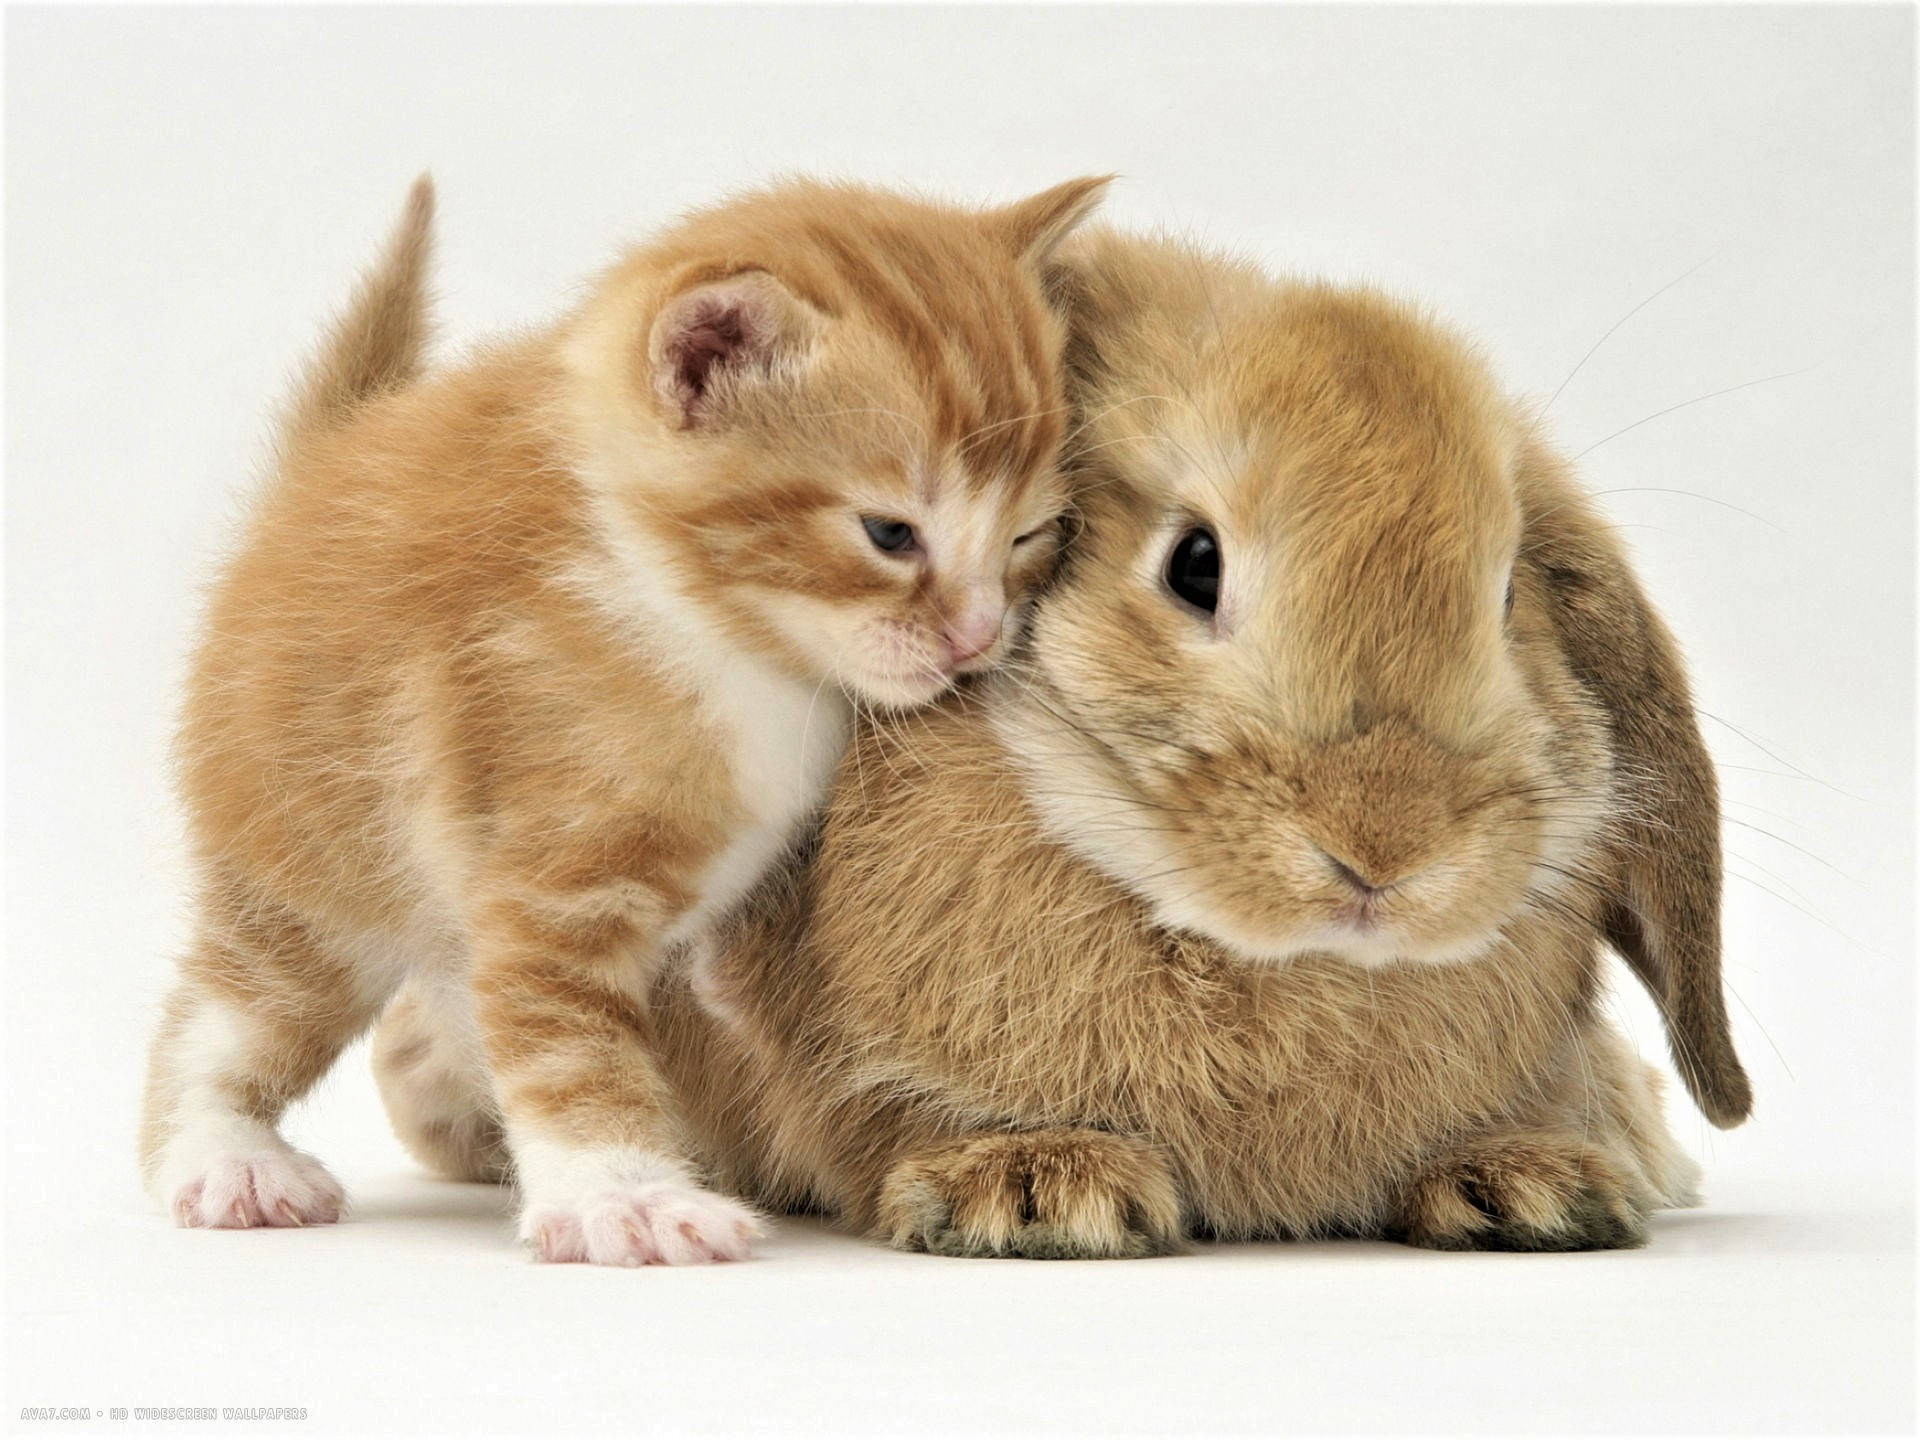 Cute Kitten With Adorable Bunny Wallpaper